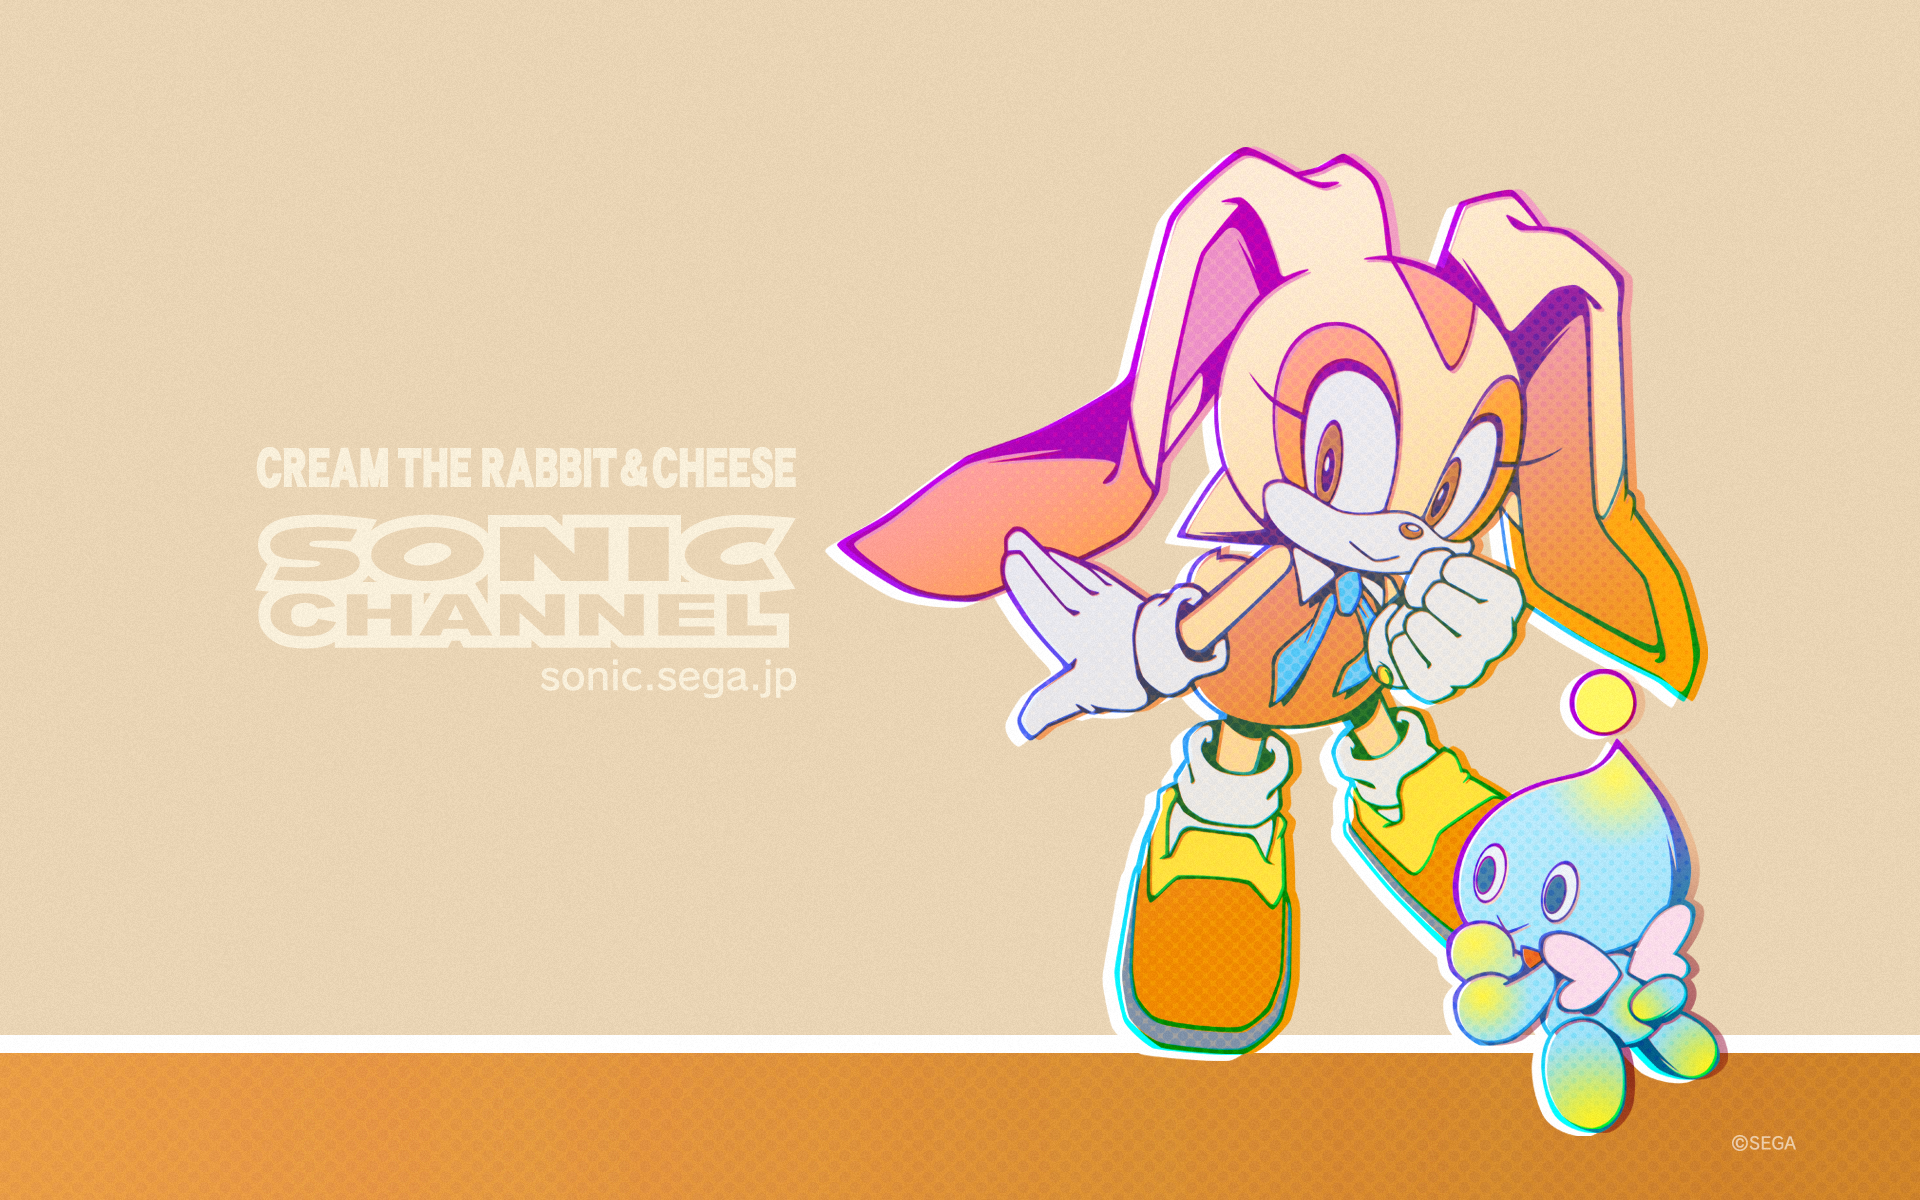 General 1920x1200 Sonic Sonic the Hedgehog cream cream the rabbit cheese chao Sega comic art video game art PC gaming July digital art simple background watermarked caption text